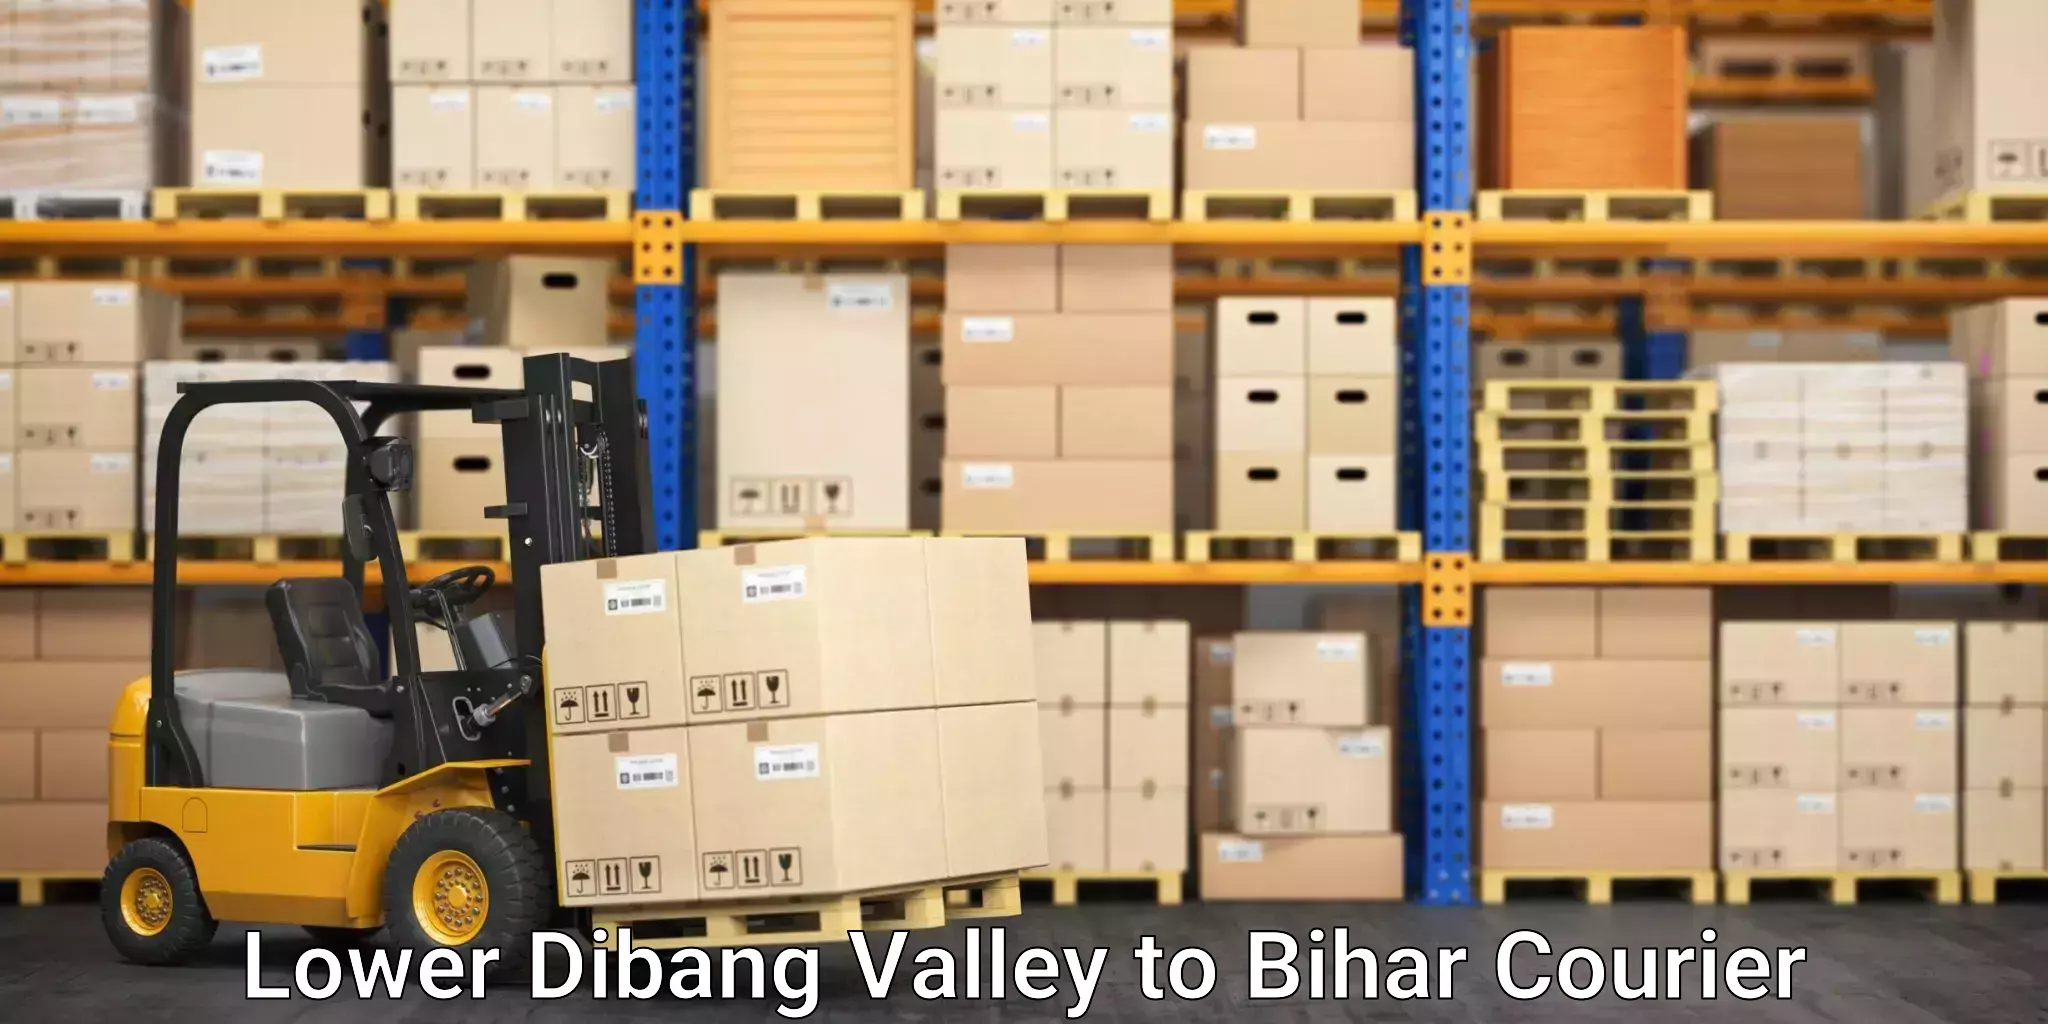 Comprehensive logistics in Lower Dibang Valley to Bhagalpur